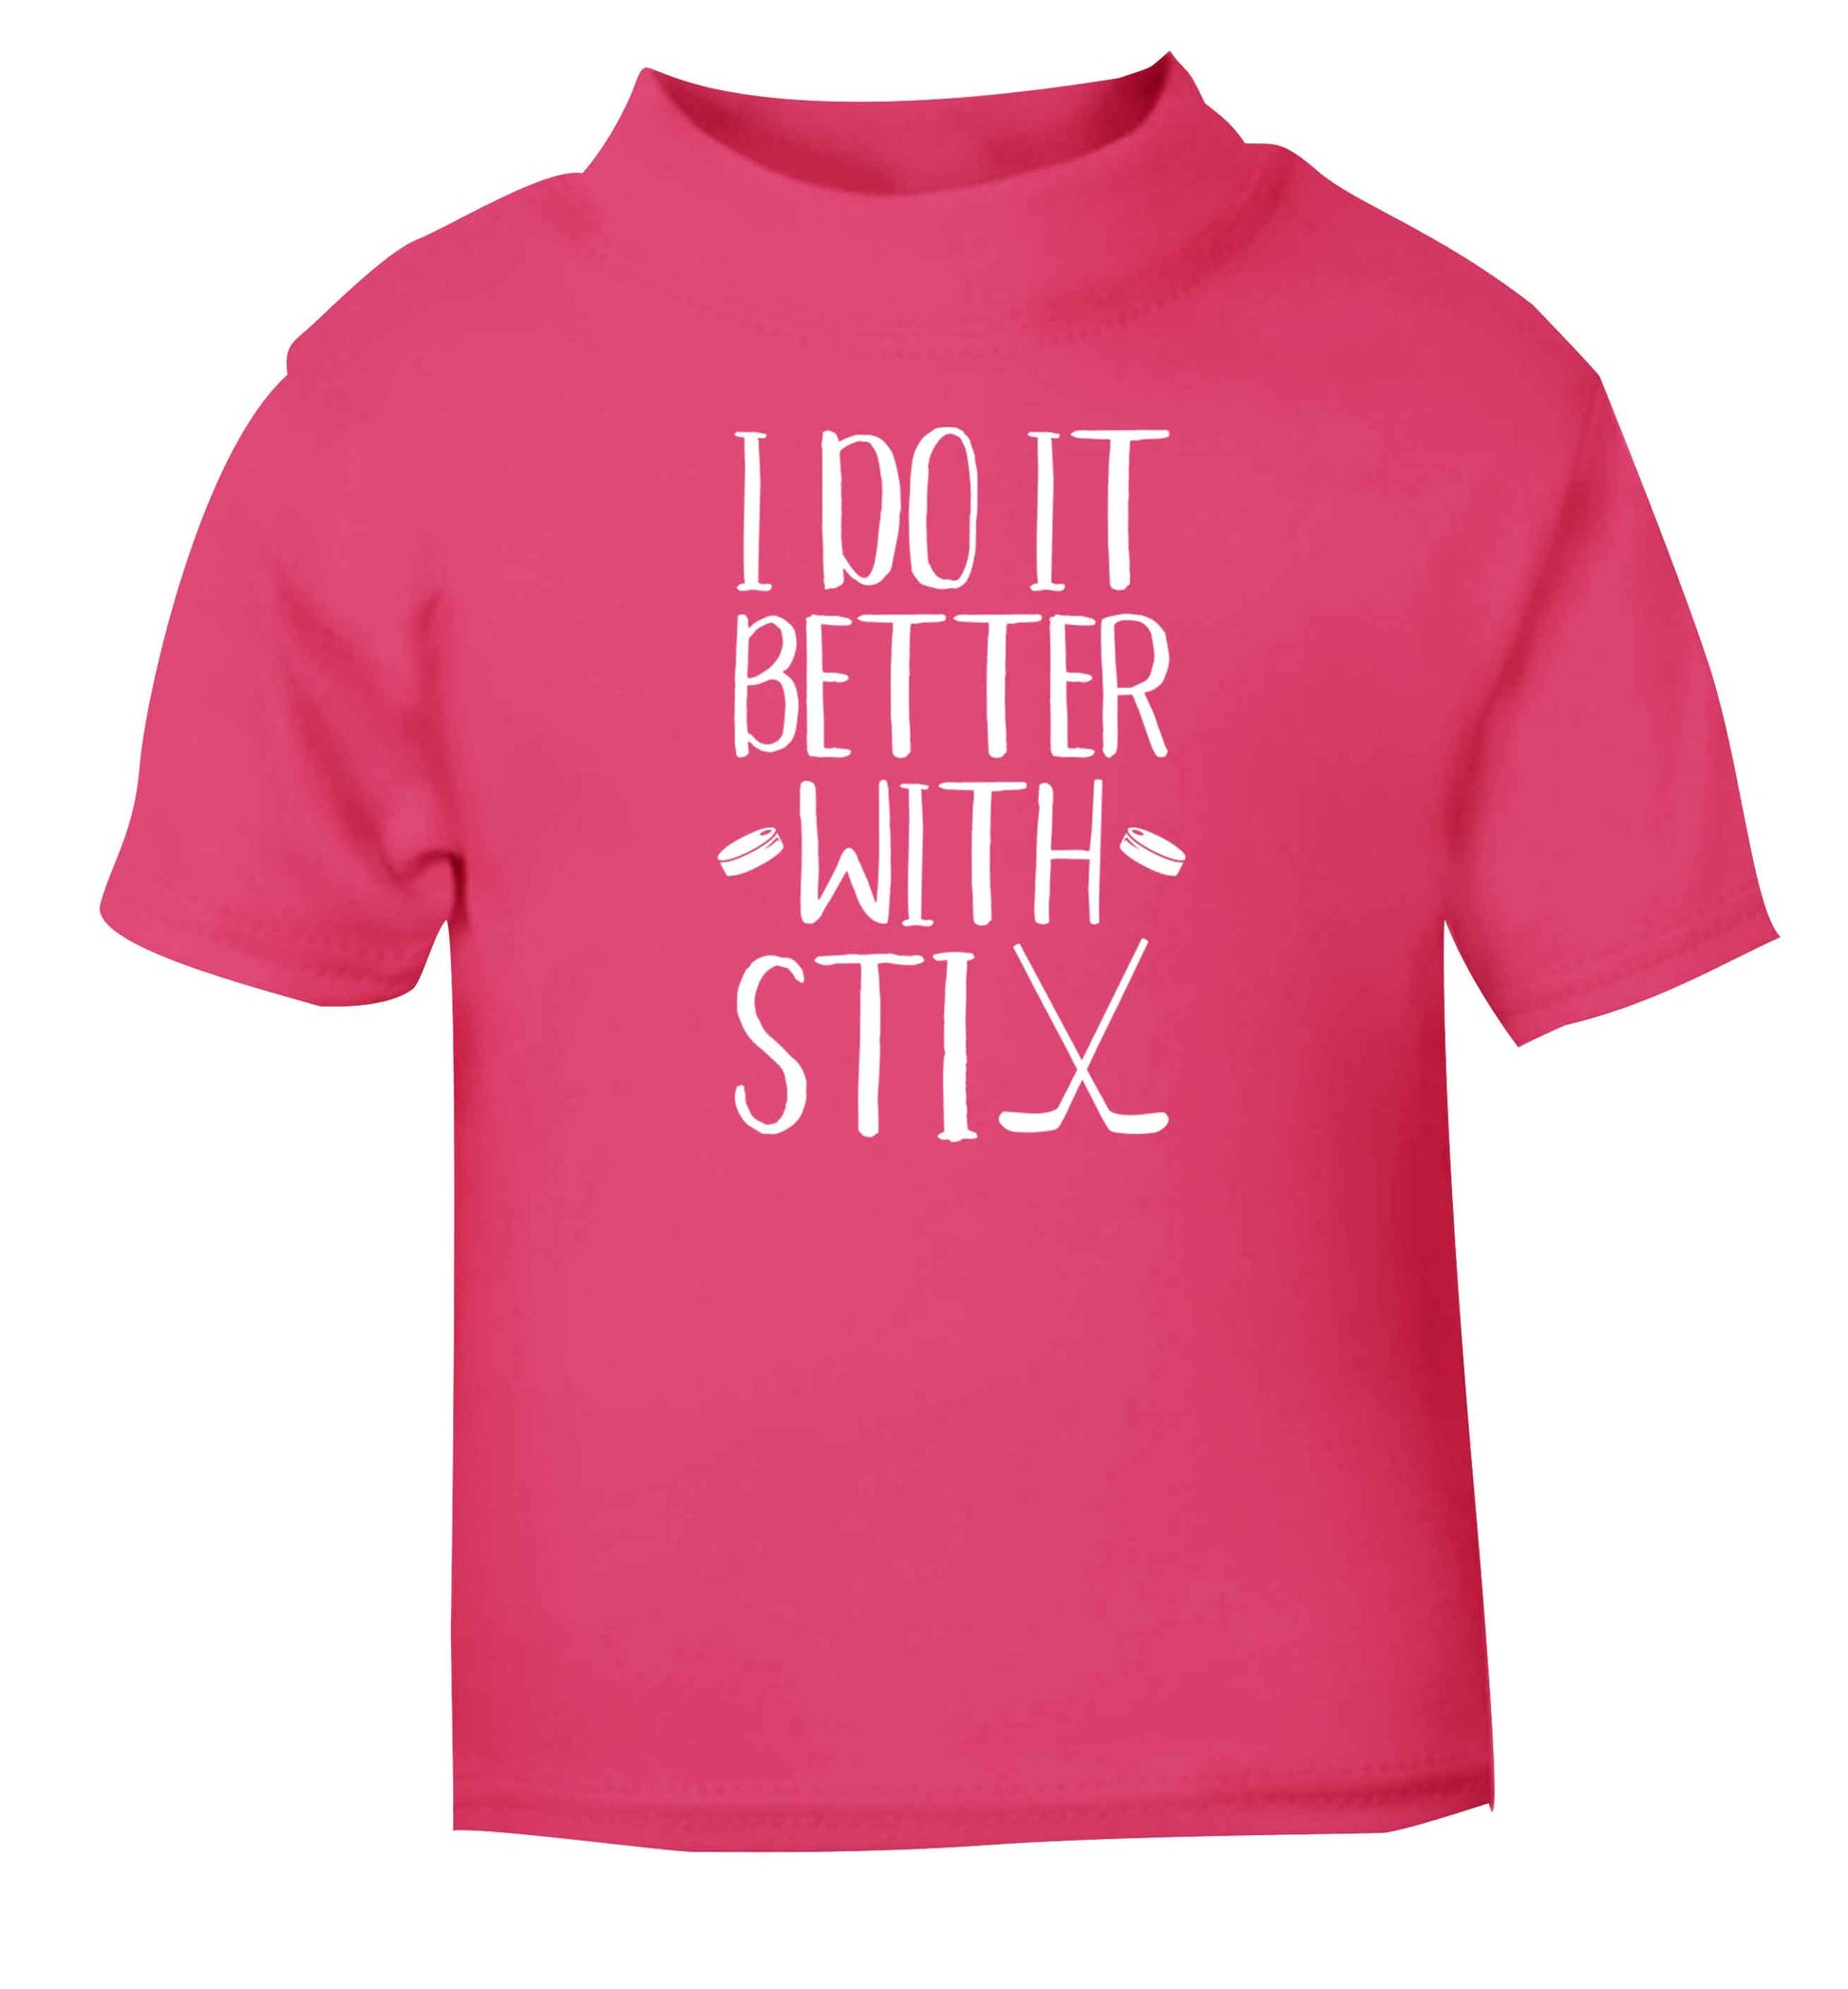 I do it better with stix (hockey) pink Baby Toddler Tshirt 2 Years